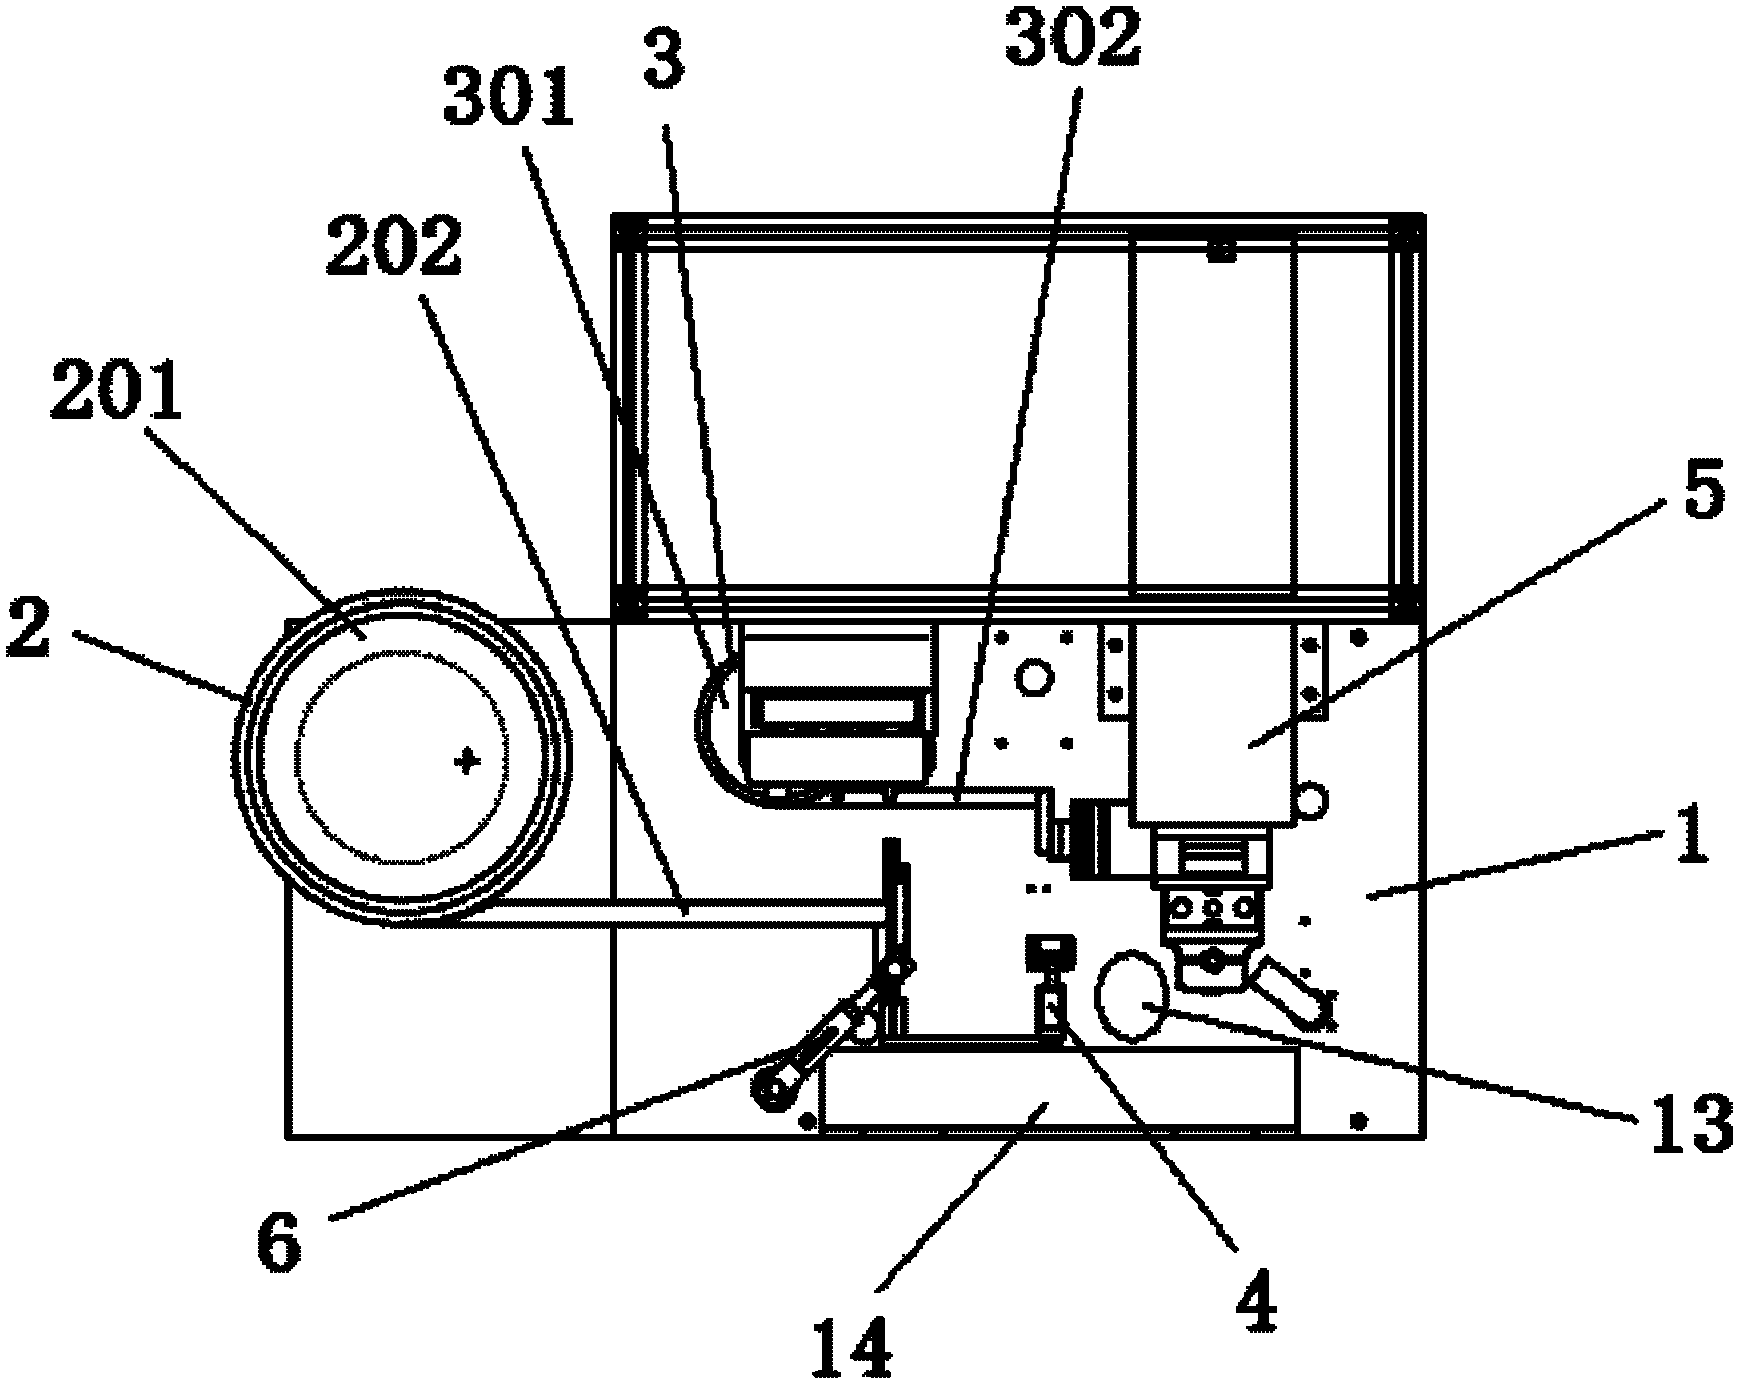 Static contact and silver point automatic welding device